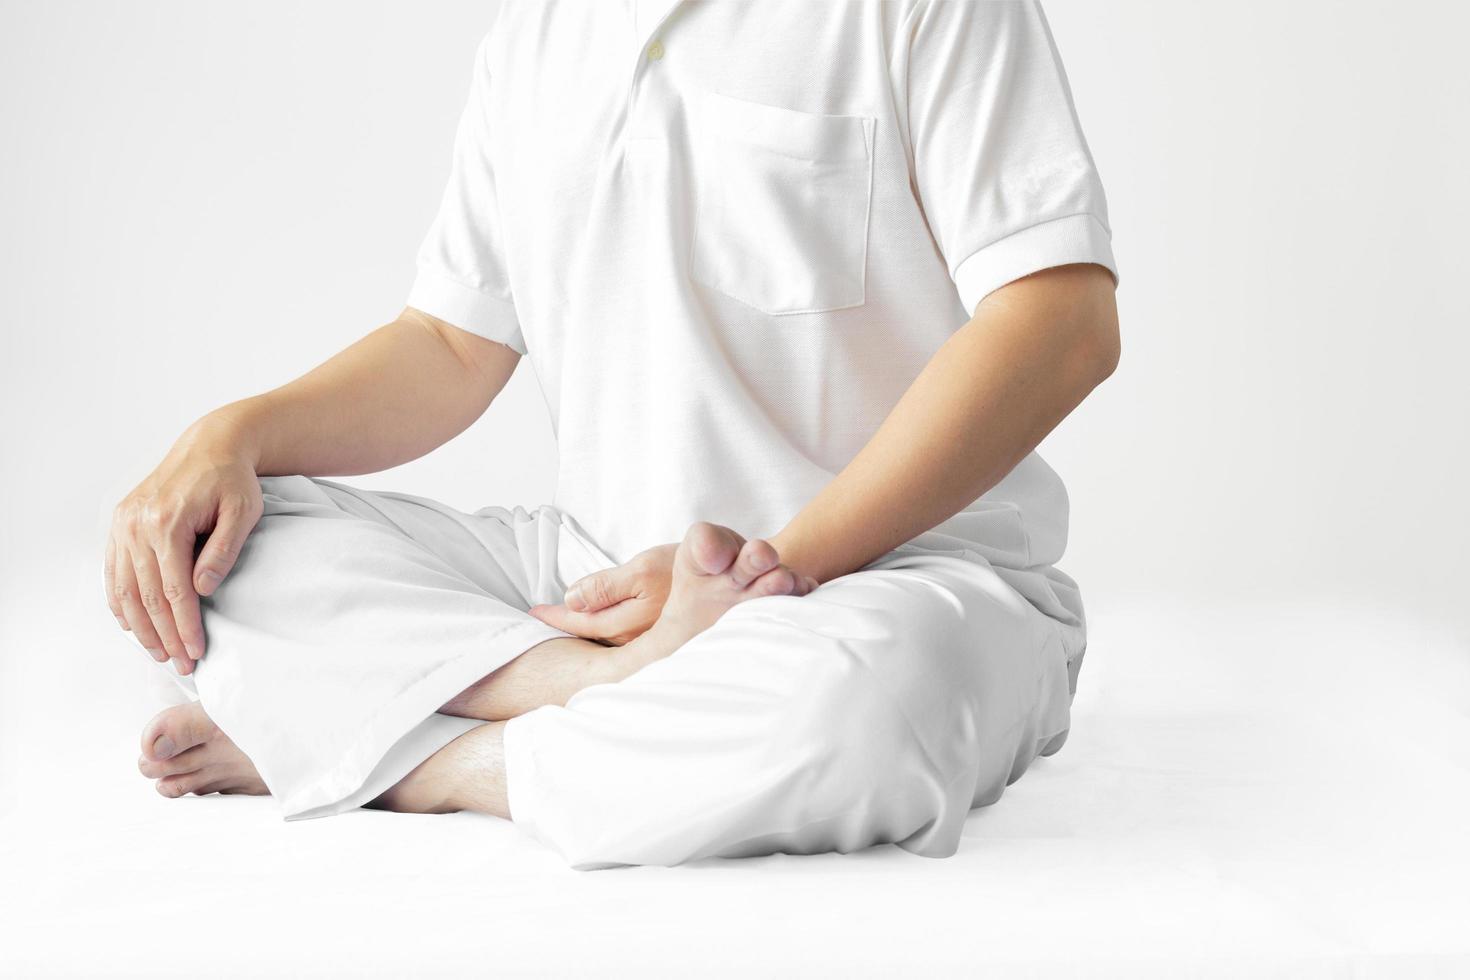 A man in a white robe meditating against a white backdrop with a clipping path. photo